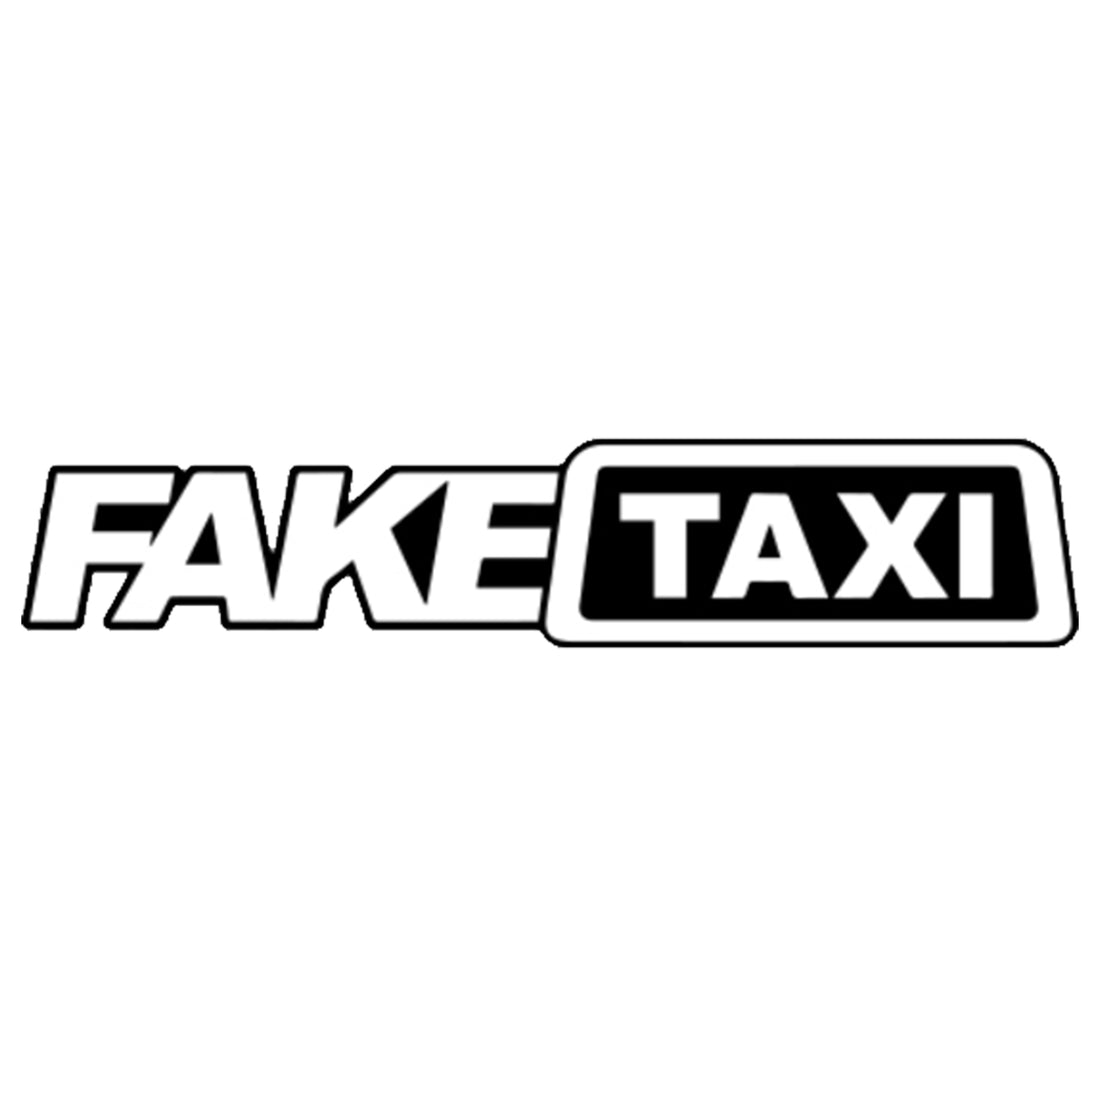 STICKER FAKE TAXI - Iconic Stickers